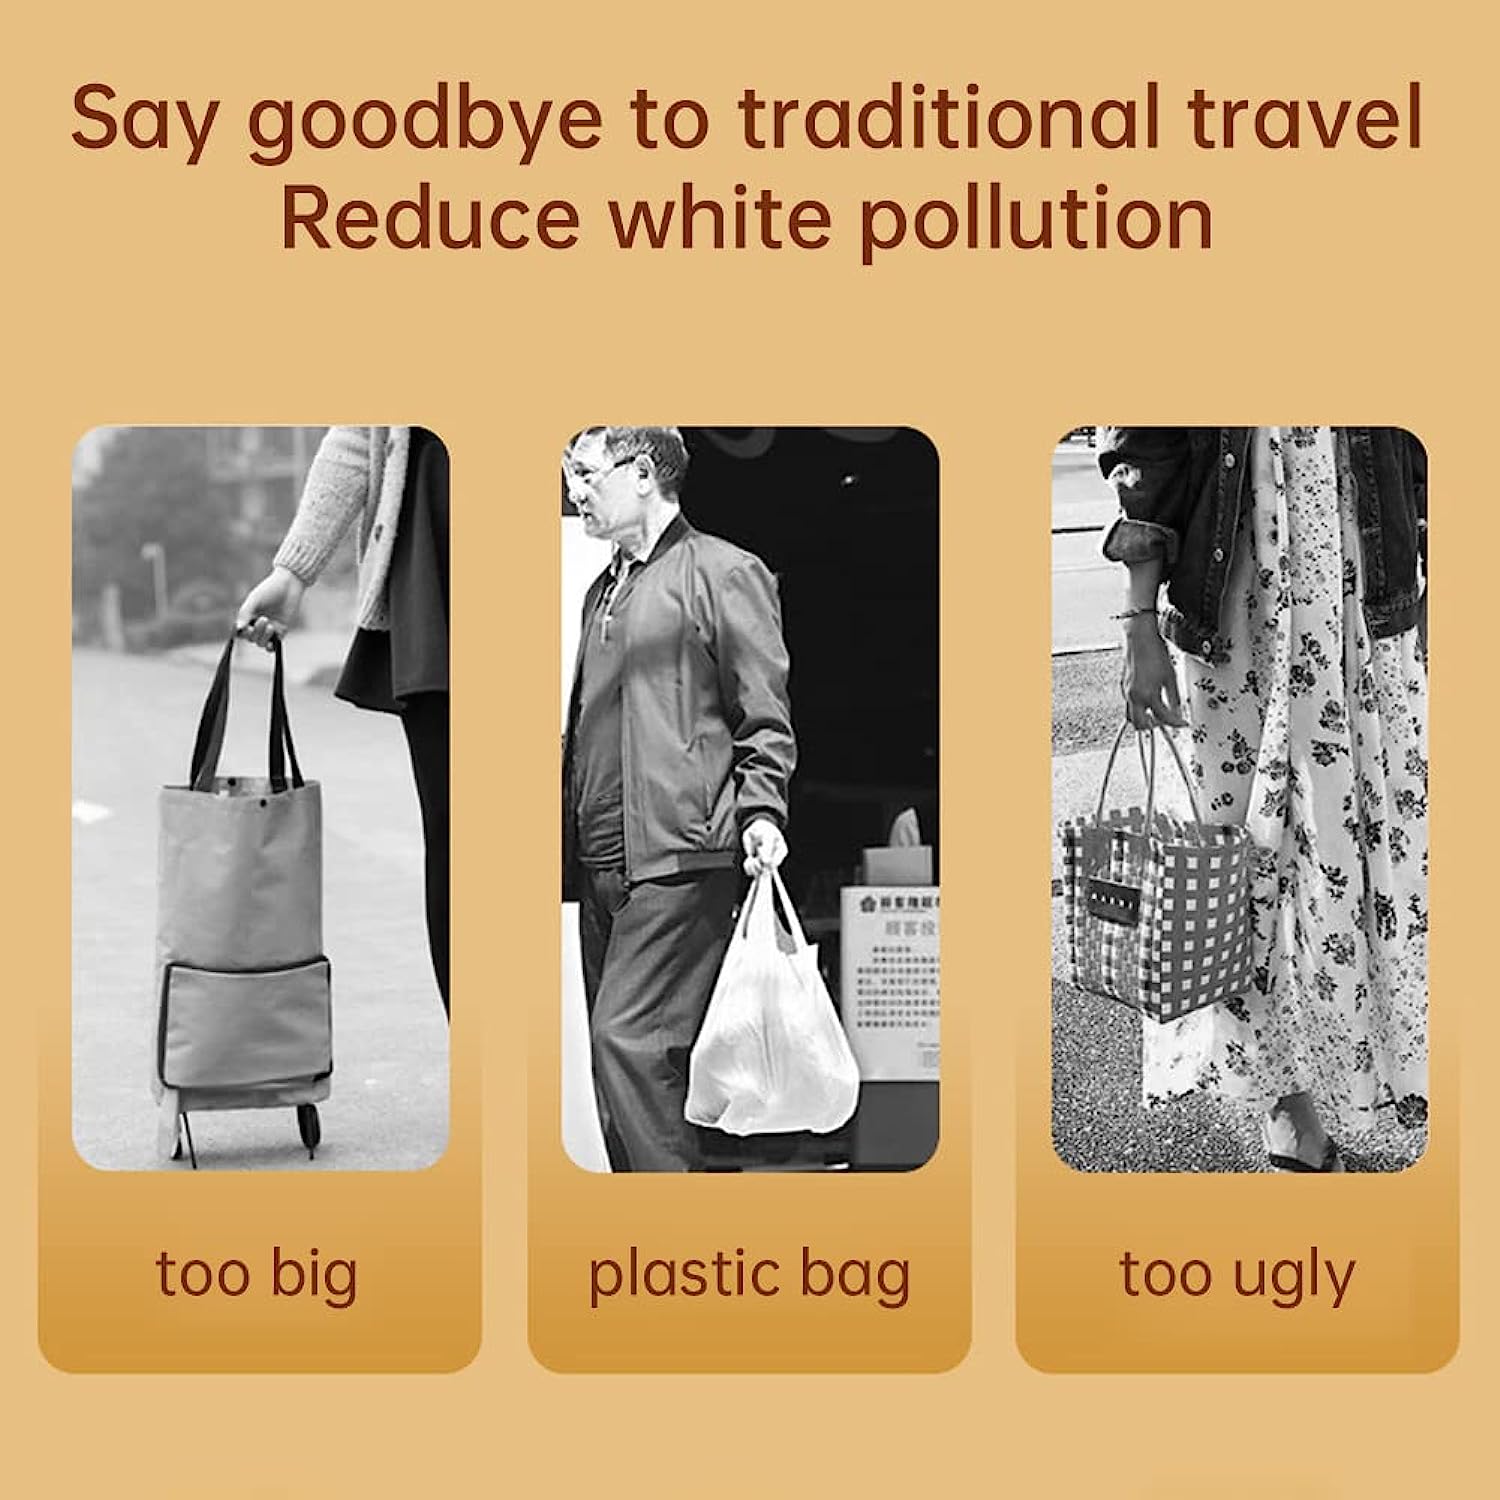 Comparing with traditional bag with Reusable Foldable Shopping Ba